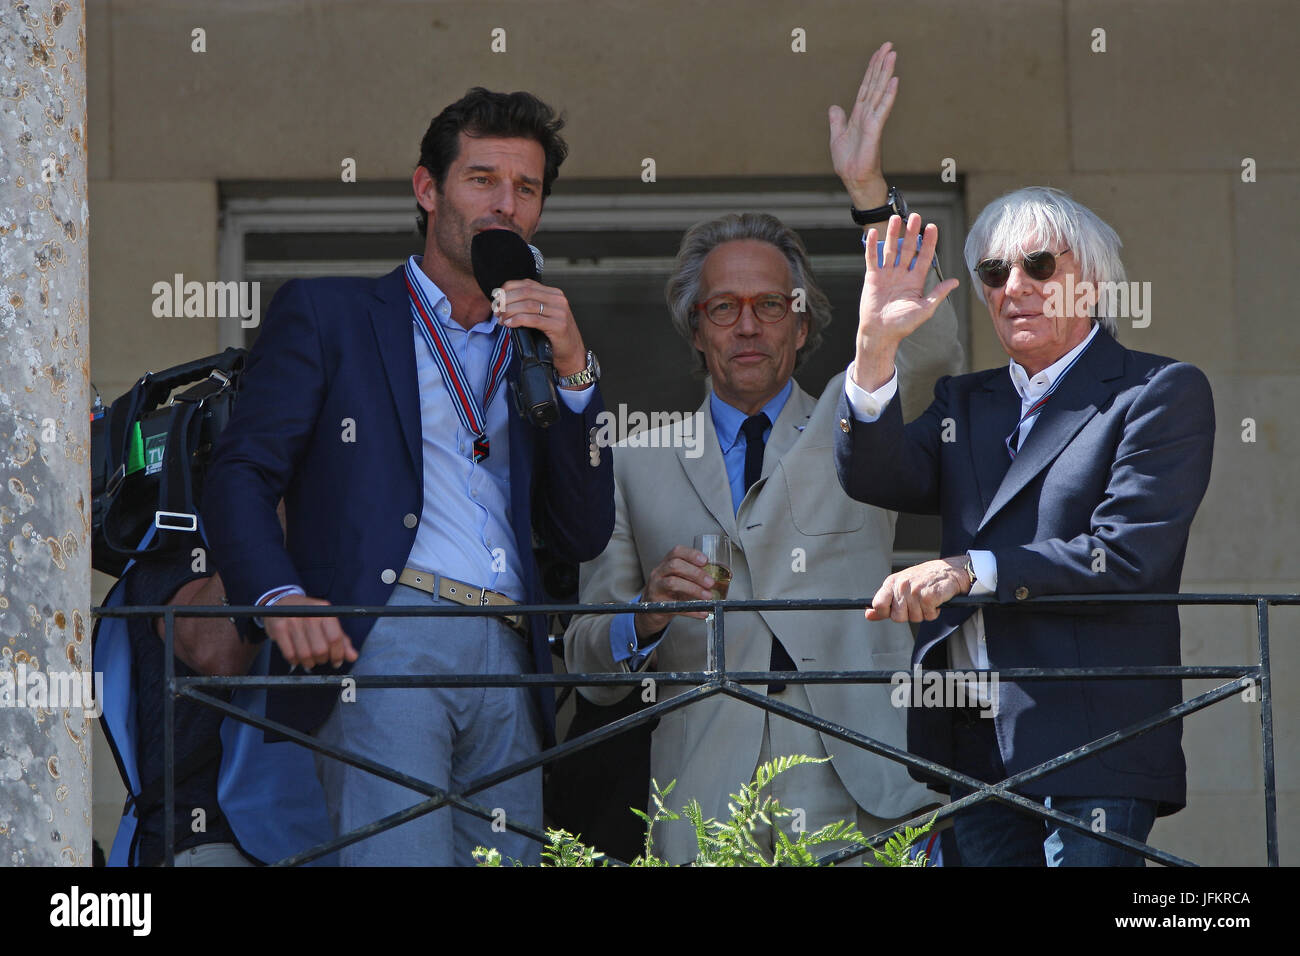 Goodwood, UK. 2nd July, 2017. Mark Webber presents Five Ages of Bernie Ecclestone celebration with Bernie Ecclestone and Lord March Credit: Malcolm Greig/Alamy Live News Stock Photo